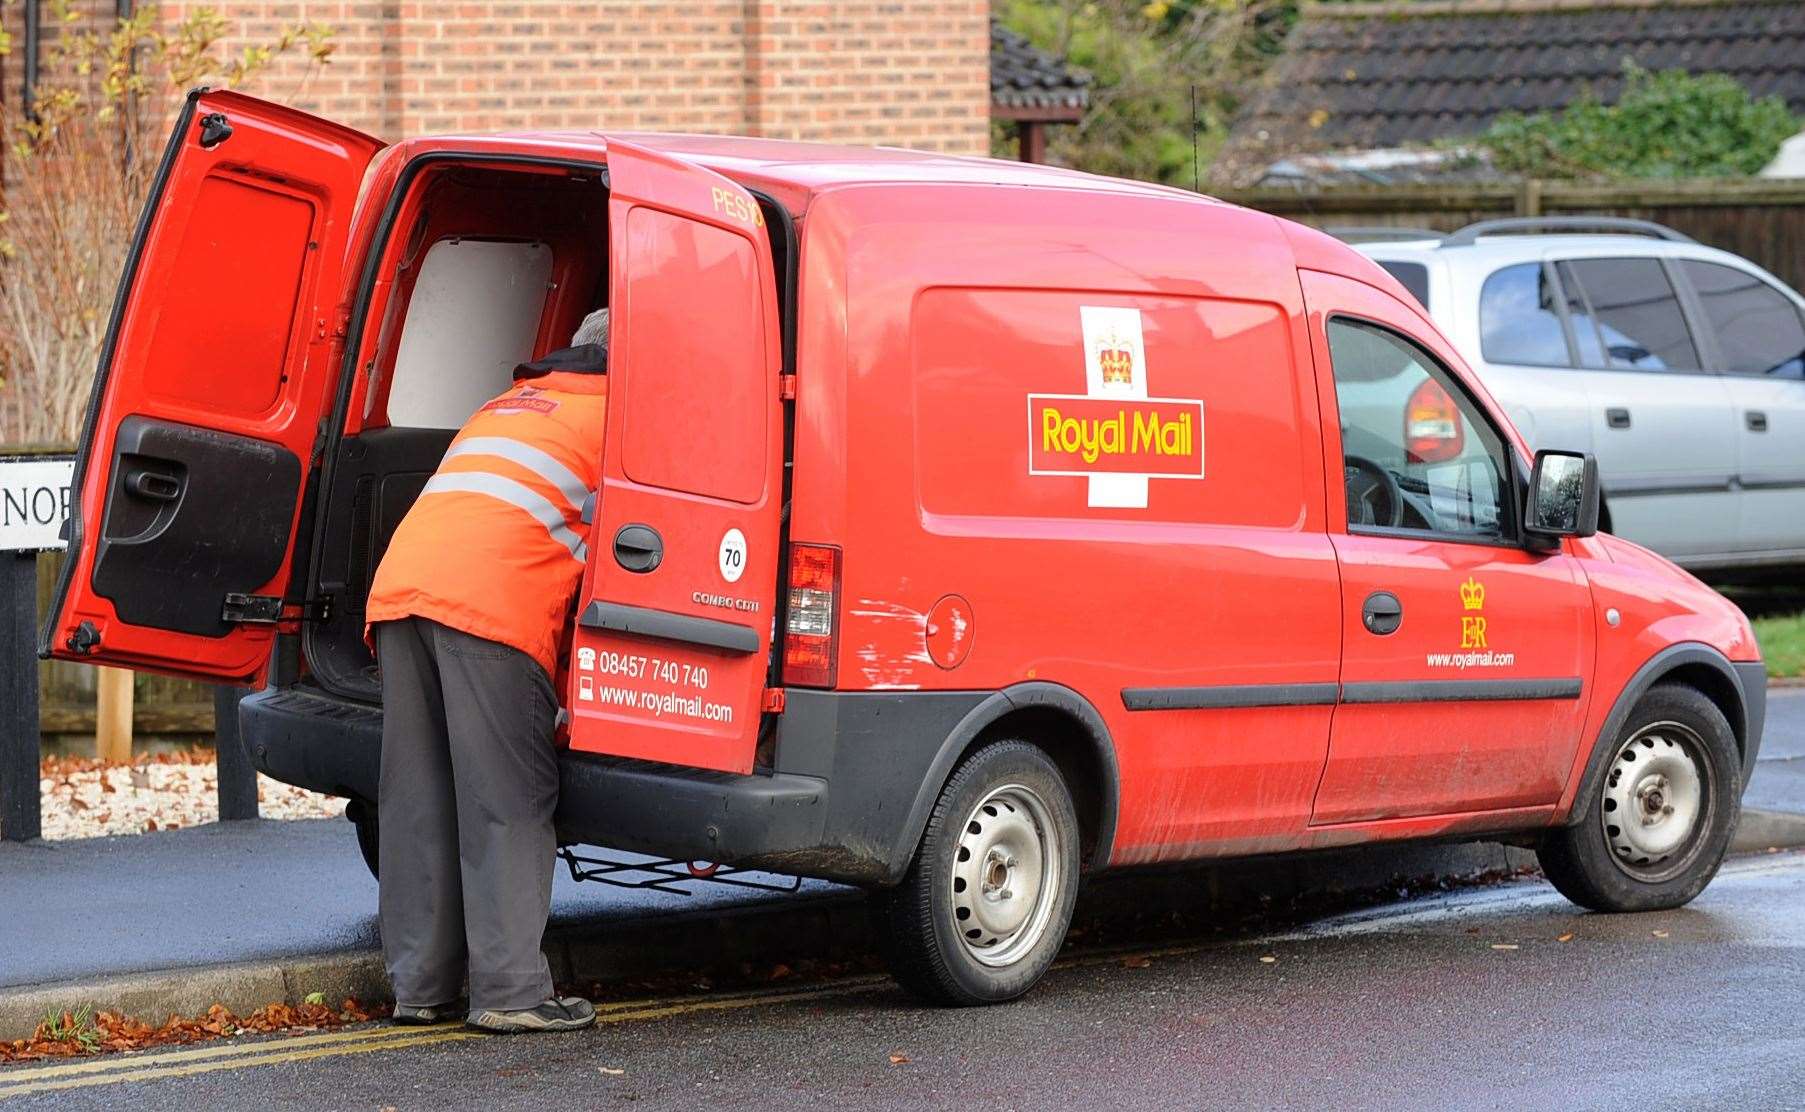 Royal Mail have confirmed the problems was down to a driver who was unfamiliar with the service, and training has now been provided